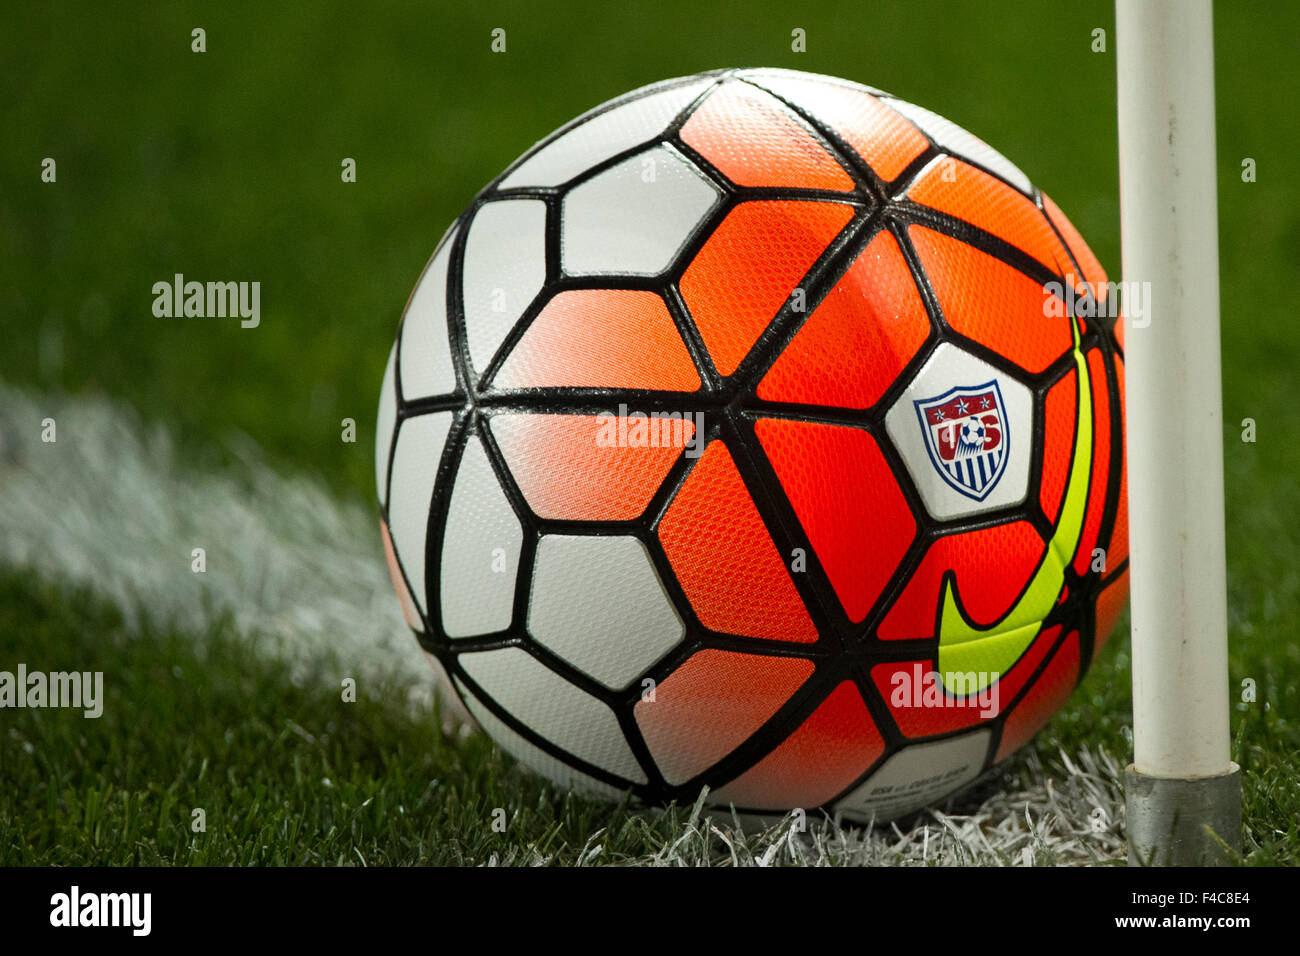 October 13, 2015: The USA soccer ball with The Nike logo is on the field  during The USA Men's National Team vs. Costa Rica Men's National Team-  international friendly at Red Bull